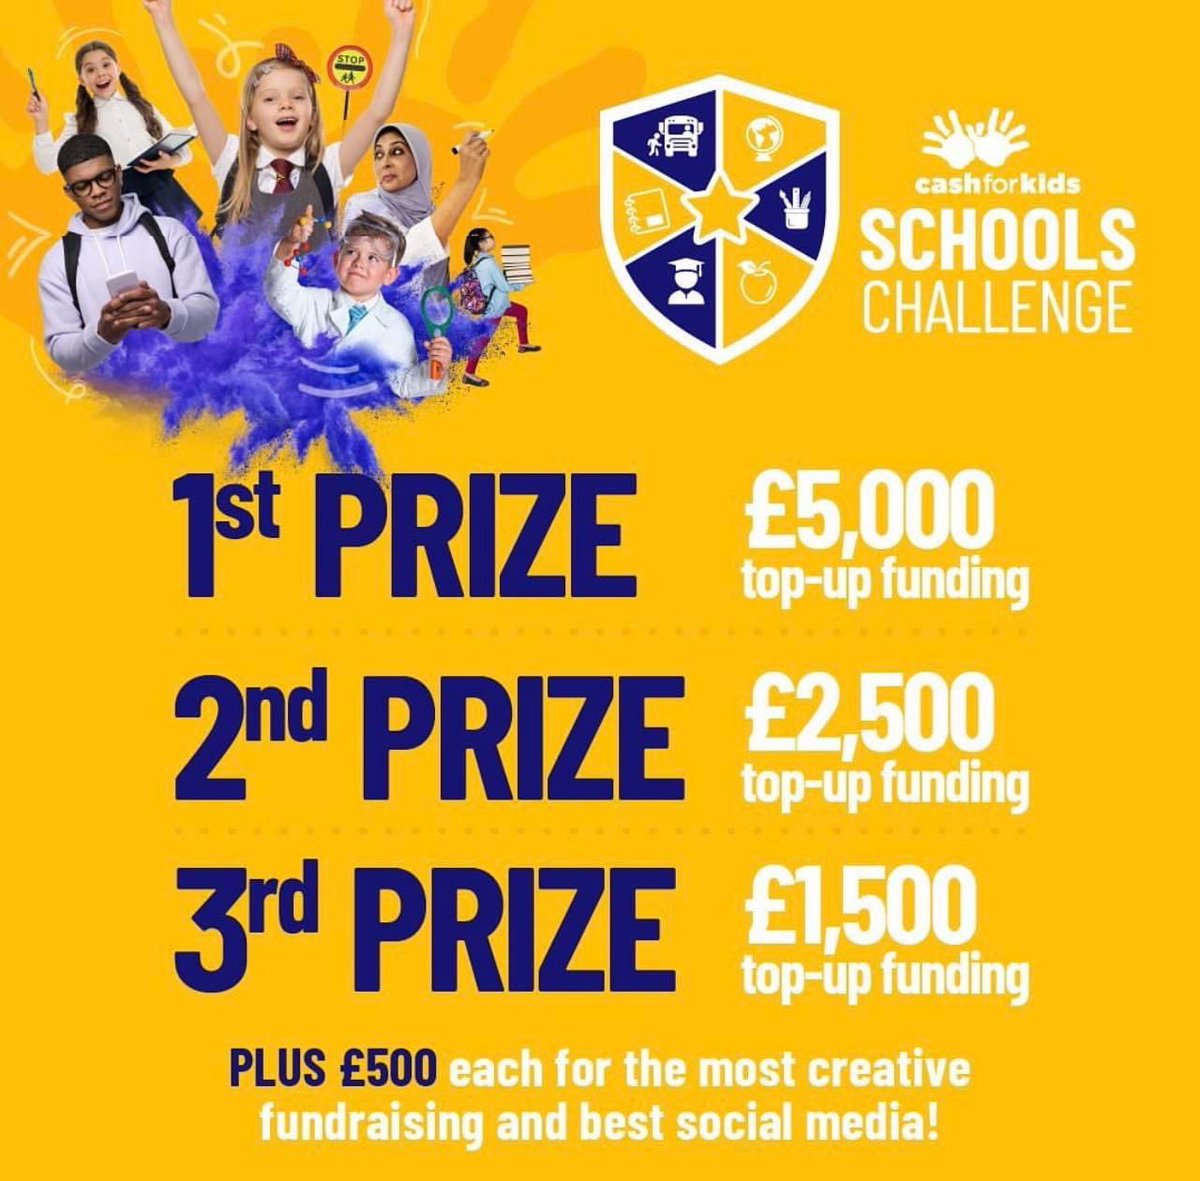 LAST DAY TO ENTER ‼️ ⬇️ Register before 5pm to take part in this years Schools Challenge with the chance to win extra funding for your school ❤️ forth1.com/schoolschallen…